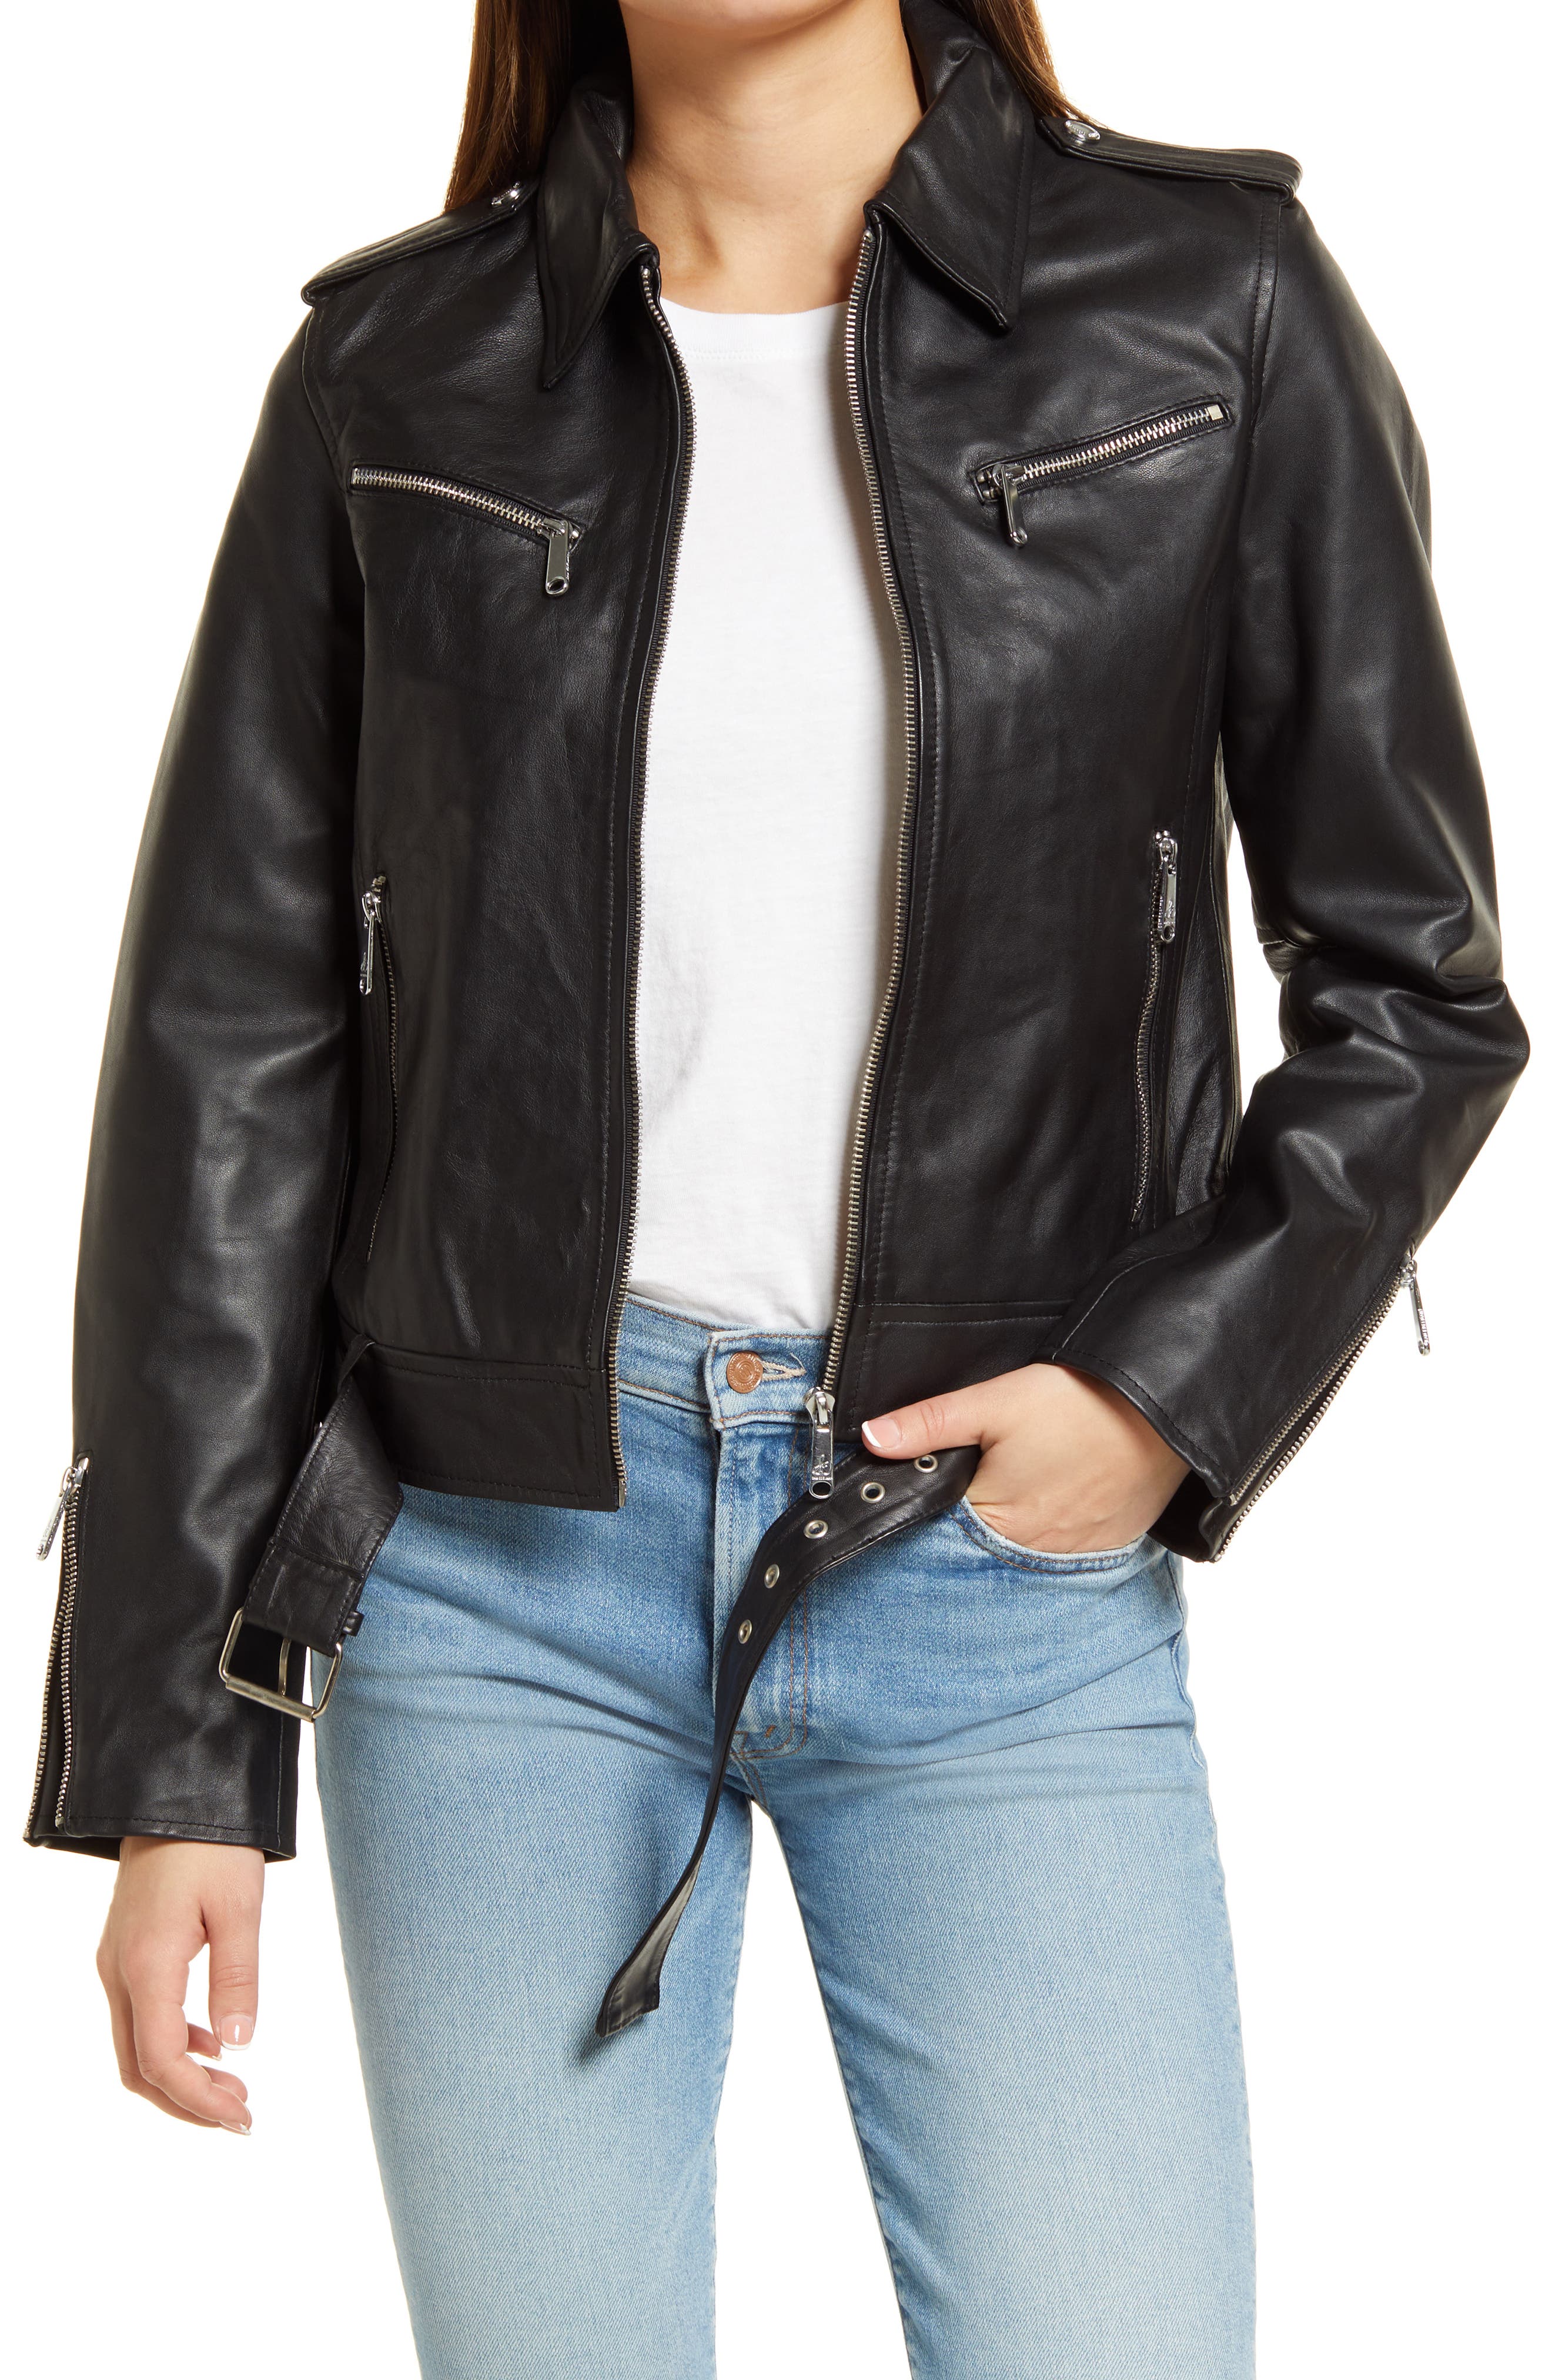 Ladies Cream Biker Style Fitted Real Lambskin Leather Jacket 